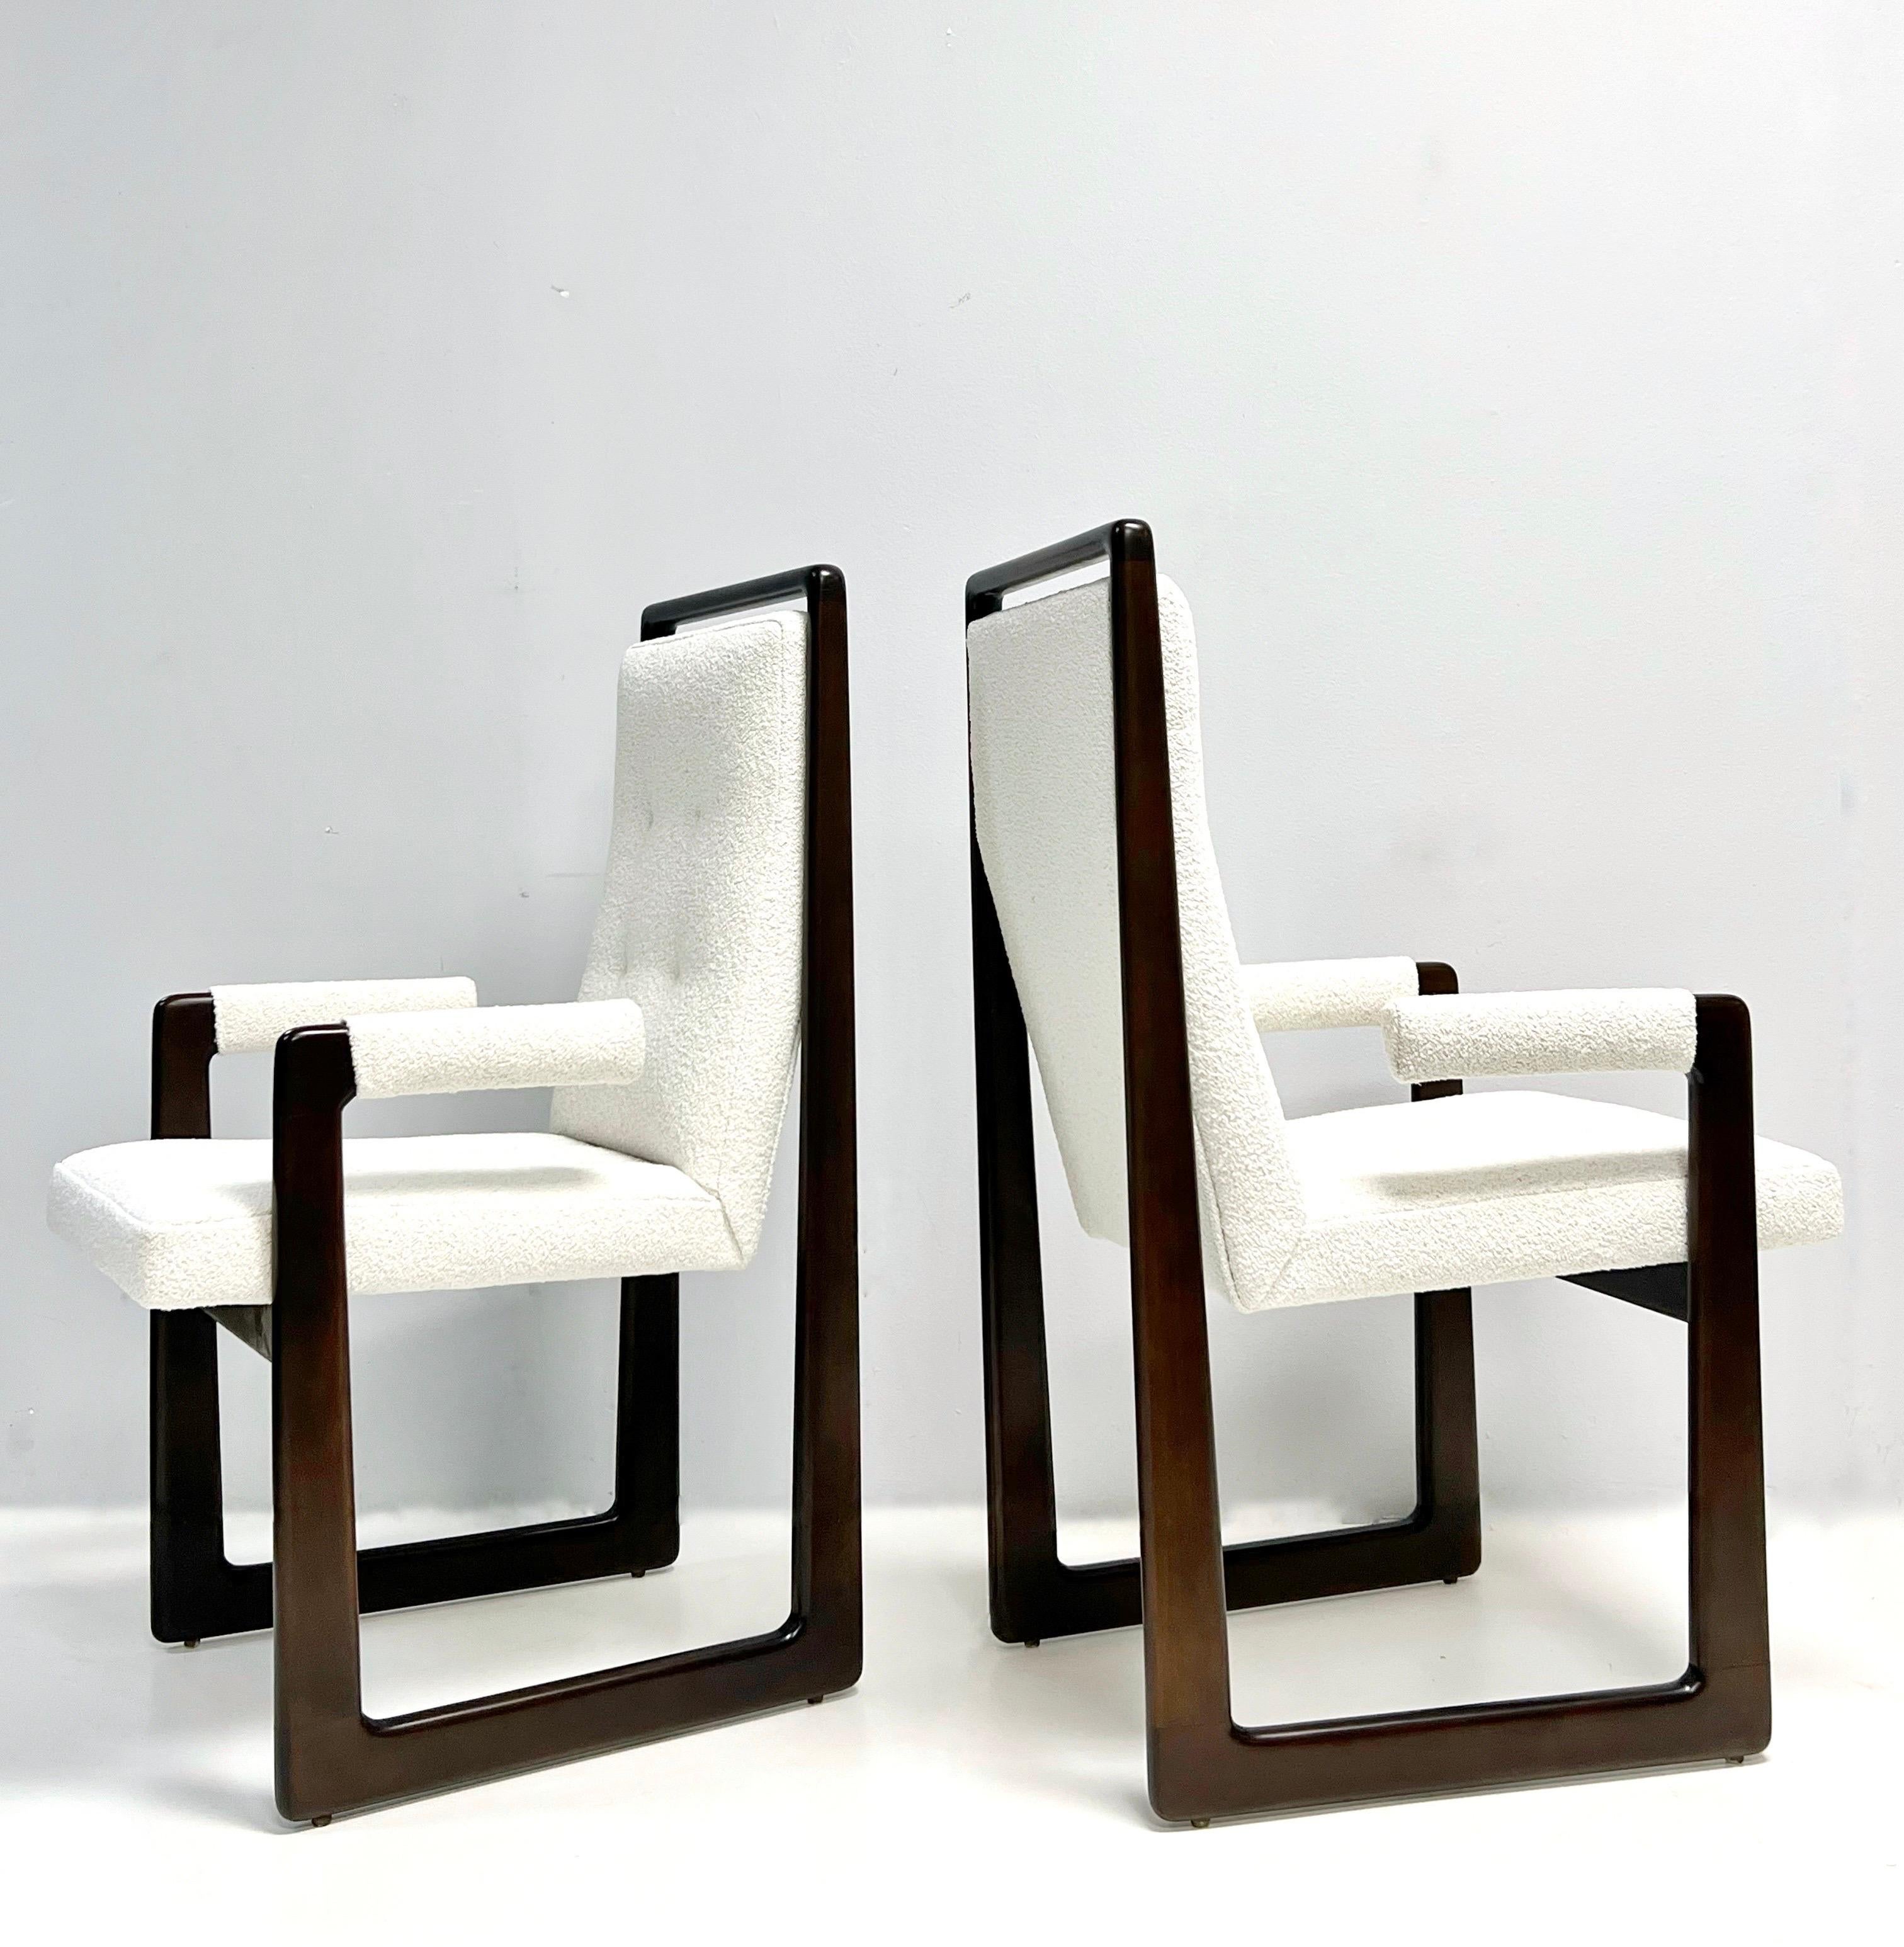 A set of 6 Cubist dining chairs by Vladimir Kagan. Wood frames with upholstered seats. Retain labels.